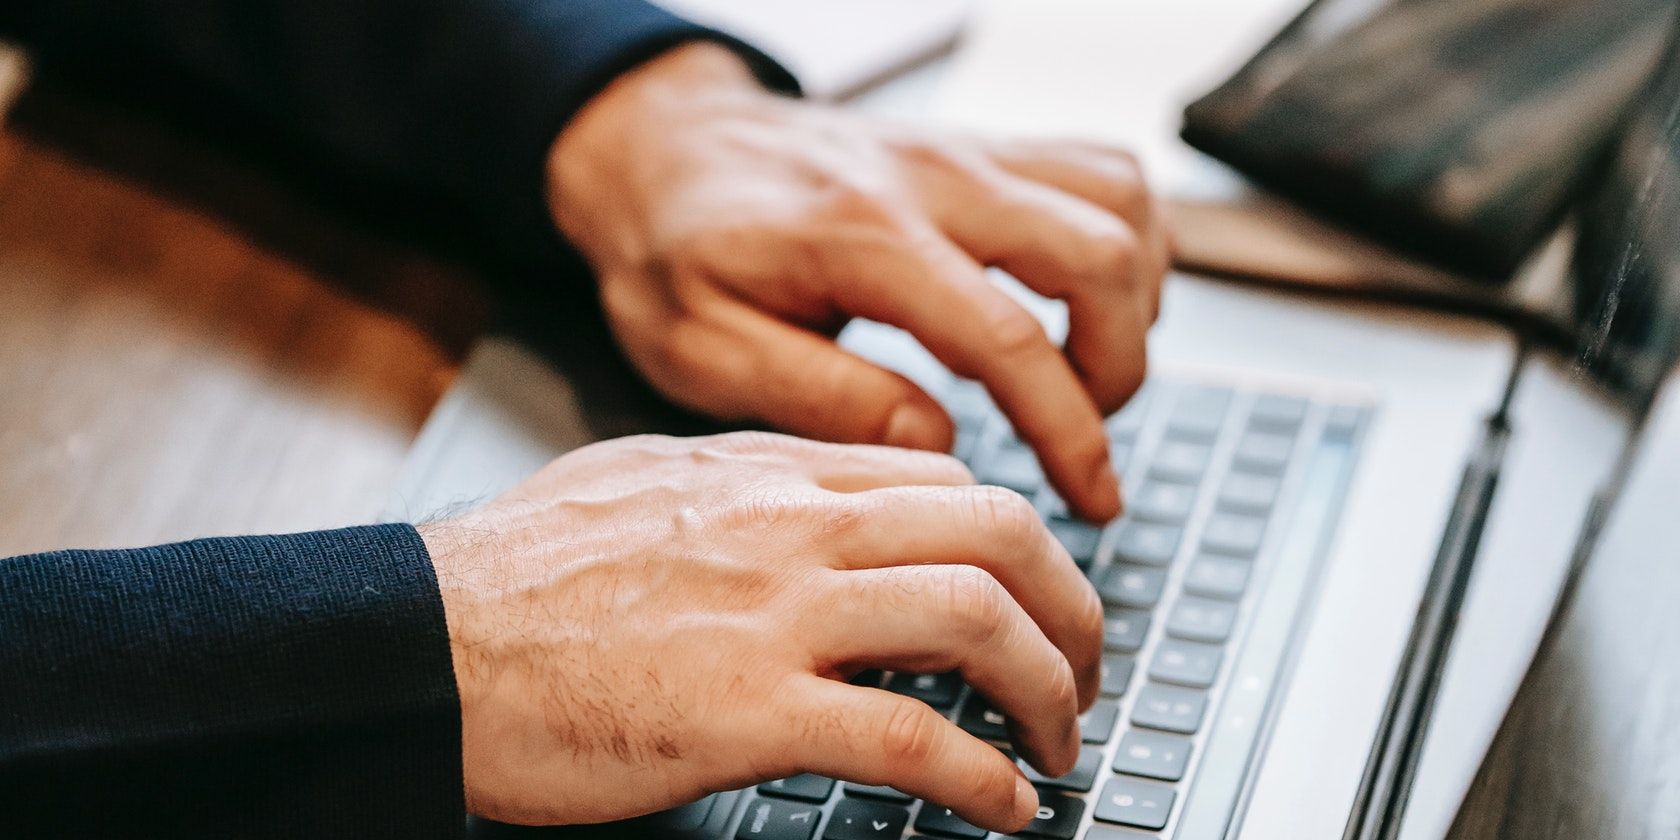 Image of two hands typing on a laptop